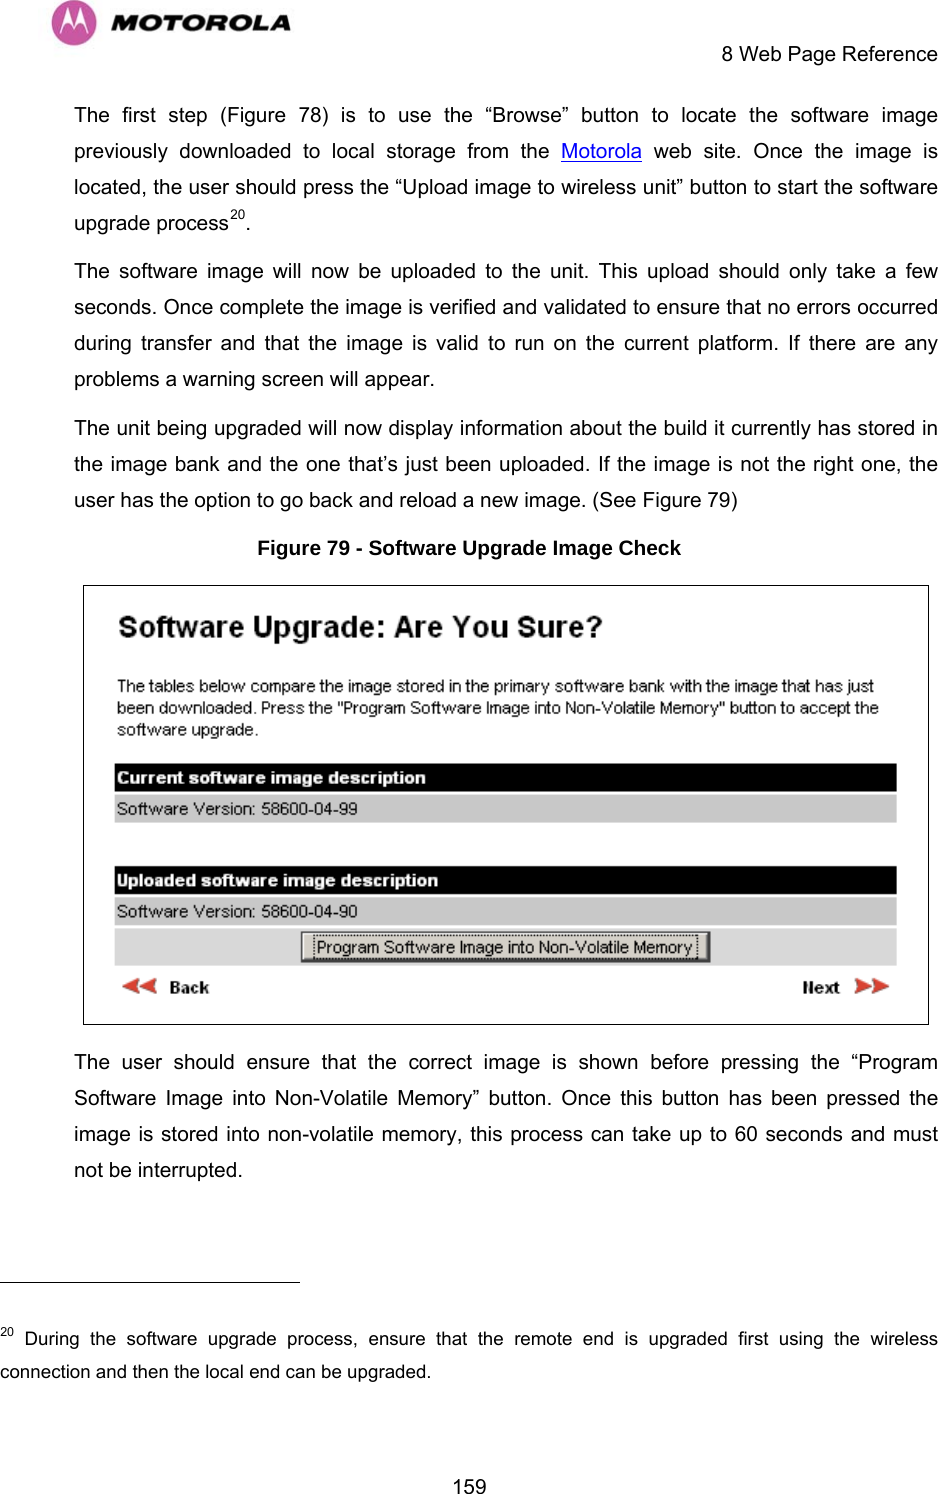     8 Web Page Reference  159The first step (Figure 78) is to use the “Browse” button to locate the software image previously downloaded to local storage from the Motorola web site. Once the image is located, the user should press the “Upload image to wireless unit” button to start the software upgrade process20.  The software image will now be uploaded to the unit. This upload should only take a few seconds. Once complete the image is verified and validated to ensure that no errors occurred during transfer and that the image is valid to run on the current platform. If there are any problems a warning screen will appear.  The unit being upgraded will now display information about the build it currently has stored in the image bank and the one that’s just been uploaded. If the image is not the right one, the user has the option to go back and reload a new image. (See Figure 79)  Figure 79 - Software Upgrade Image Check  The user should ensure that the correct image is shown before pressing the “Program Software Image into Non-Volatile Memory” button. Once this button has been pressed the image is stored into non-volatile memory, this process can take up to 60 seconds and must not be interrupted.                                                       20 During the software upgrade process, ensure that the remote end is upgraded first using the wireless connection and then the local end can be upgraded. 